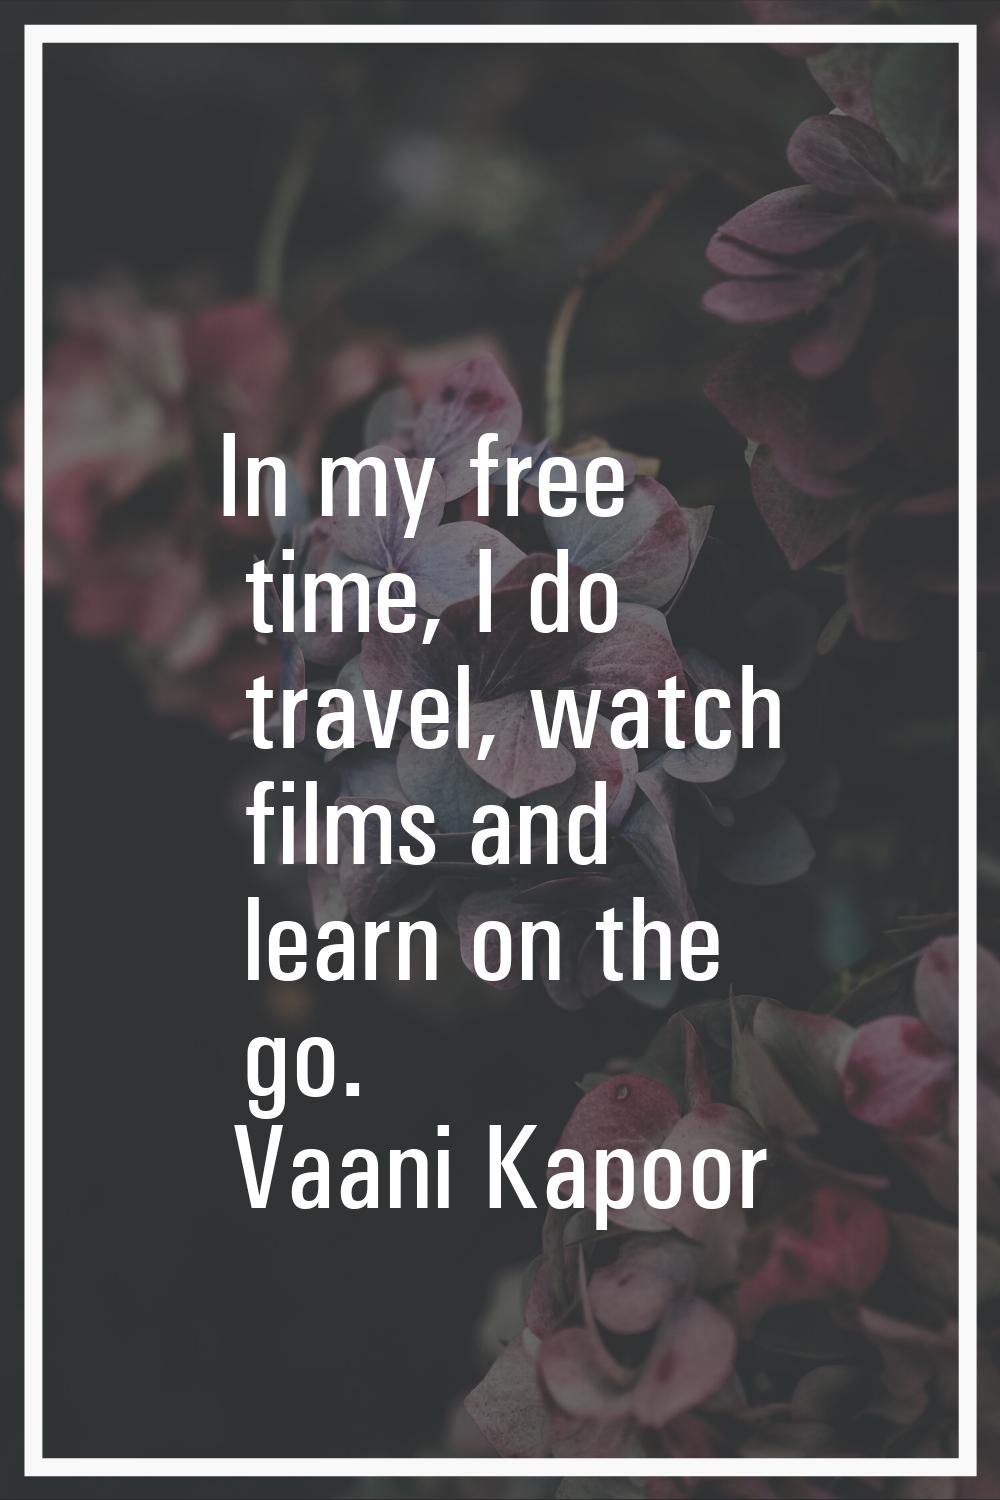 In my free time, I do travel, watch films and learn on the go.